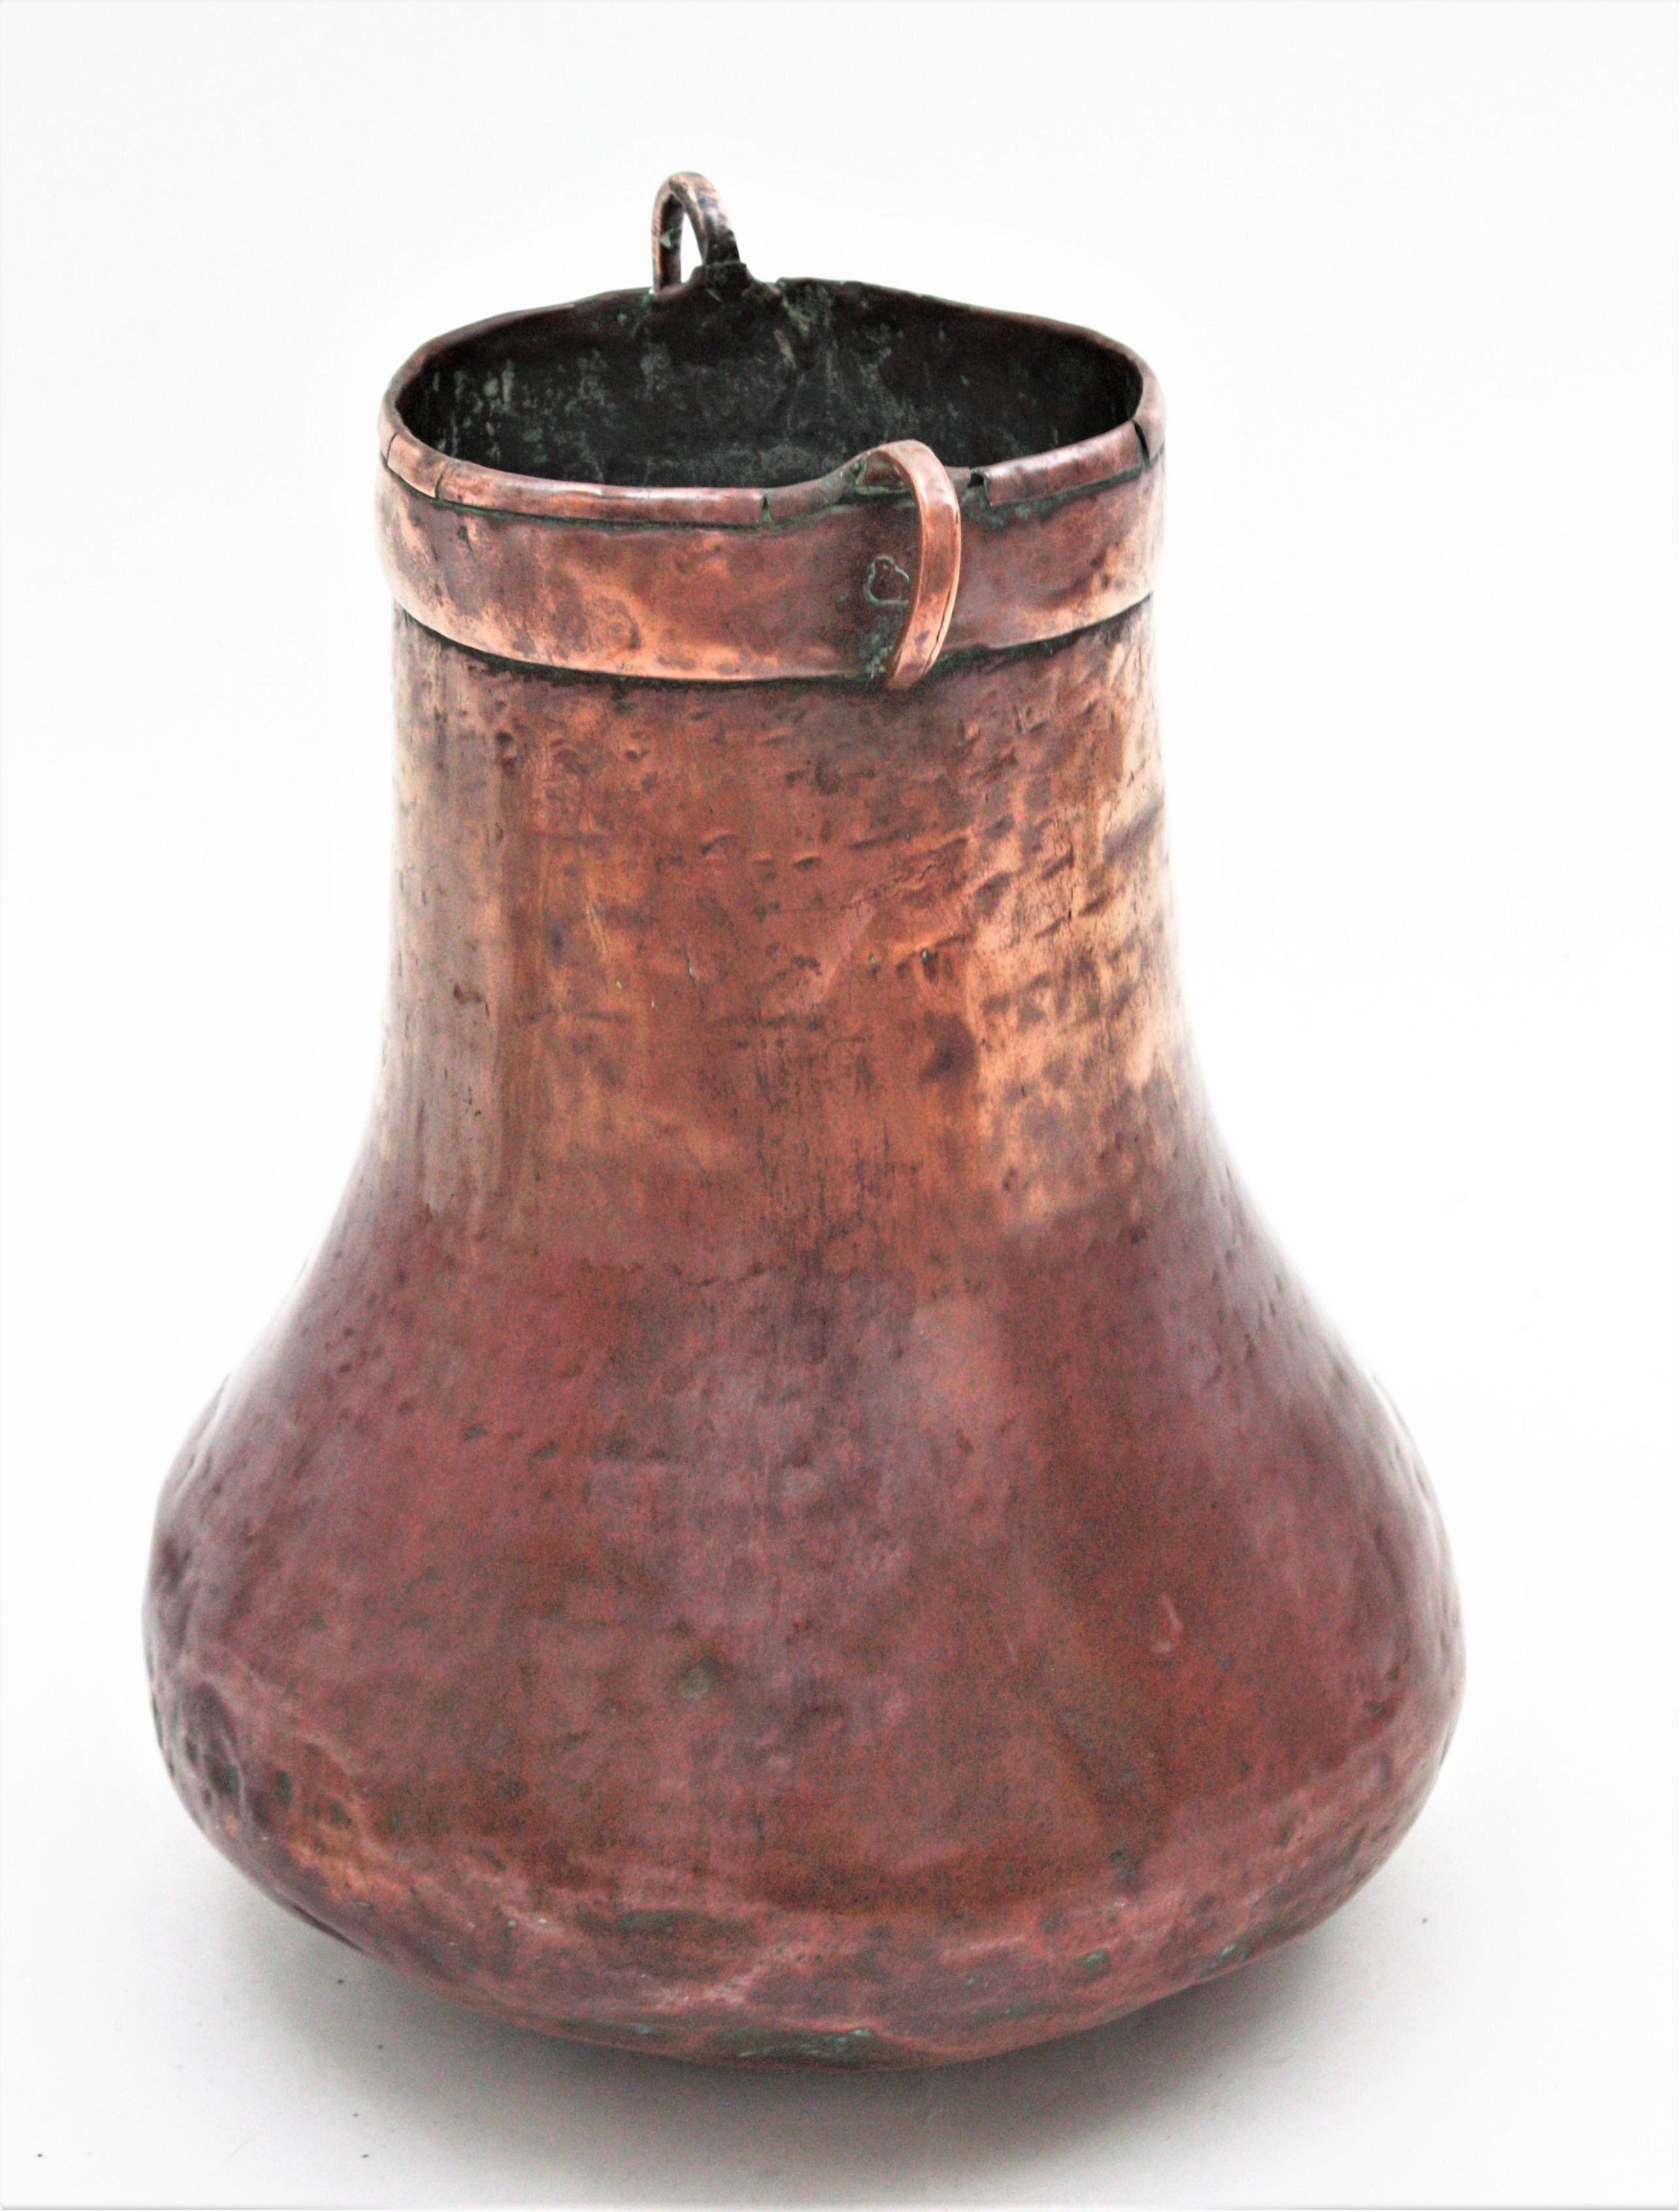 Antique hand-hammered tall copper cauldron with handles. France, 1920s.
This handcrafted copper cauldron has a nice design and a terrific aged patina. The copper is heavily marked by the pass of time and it has a strong visual effect.
Copper